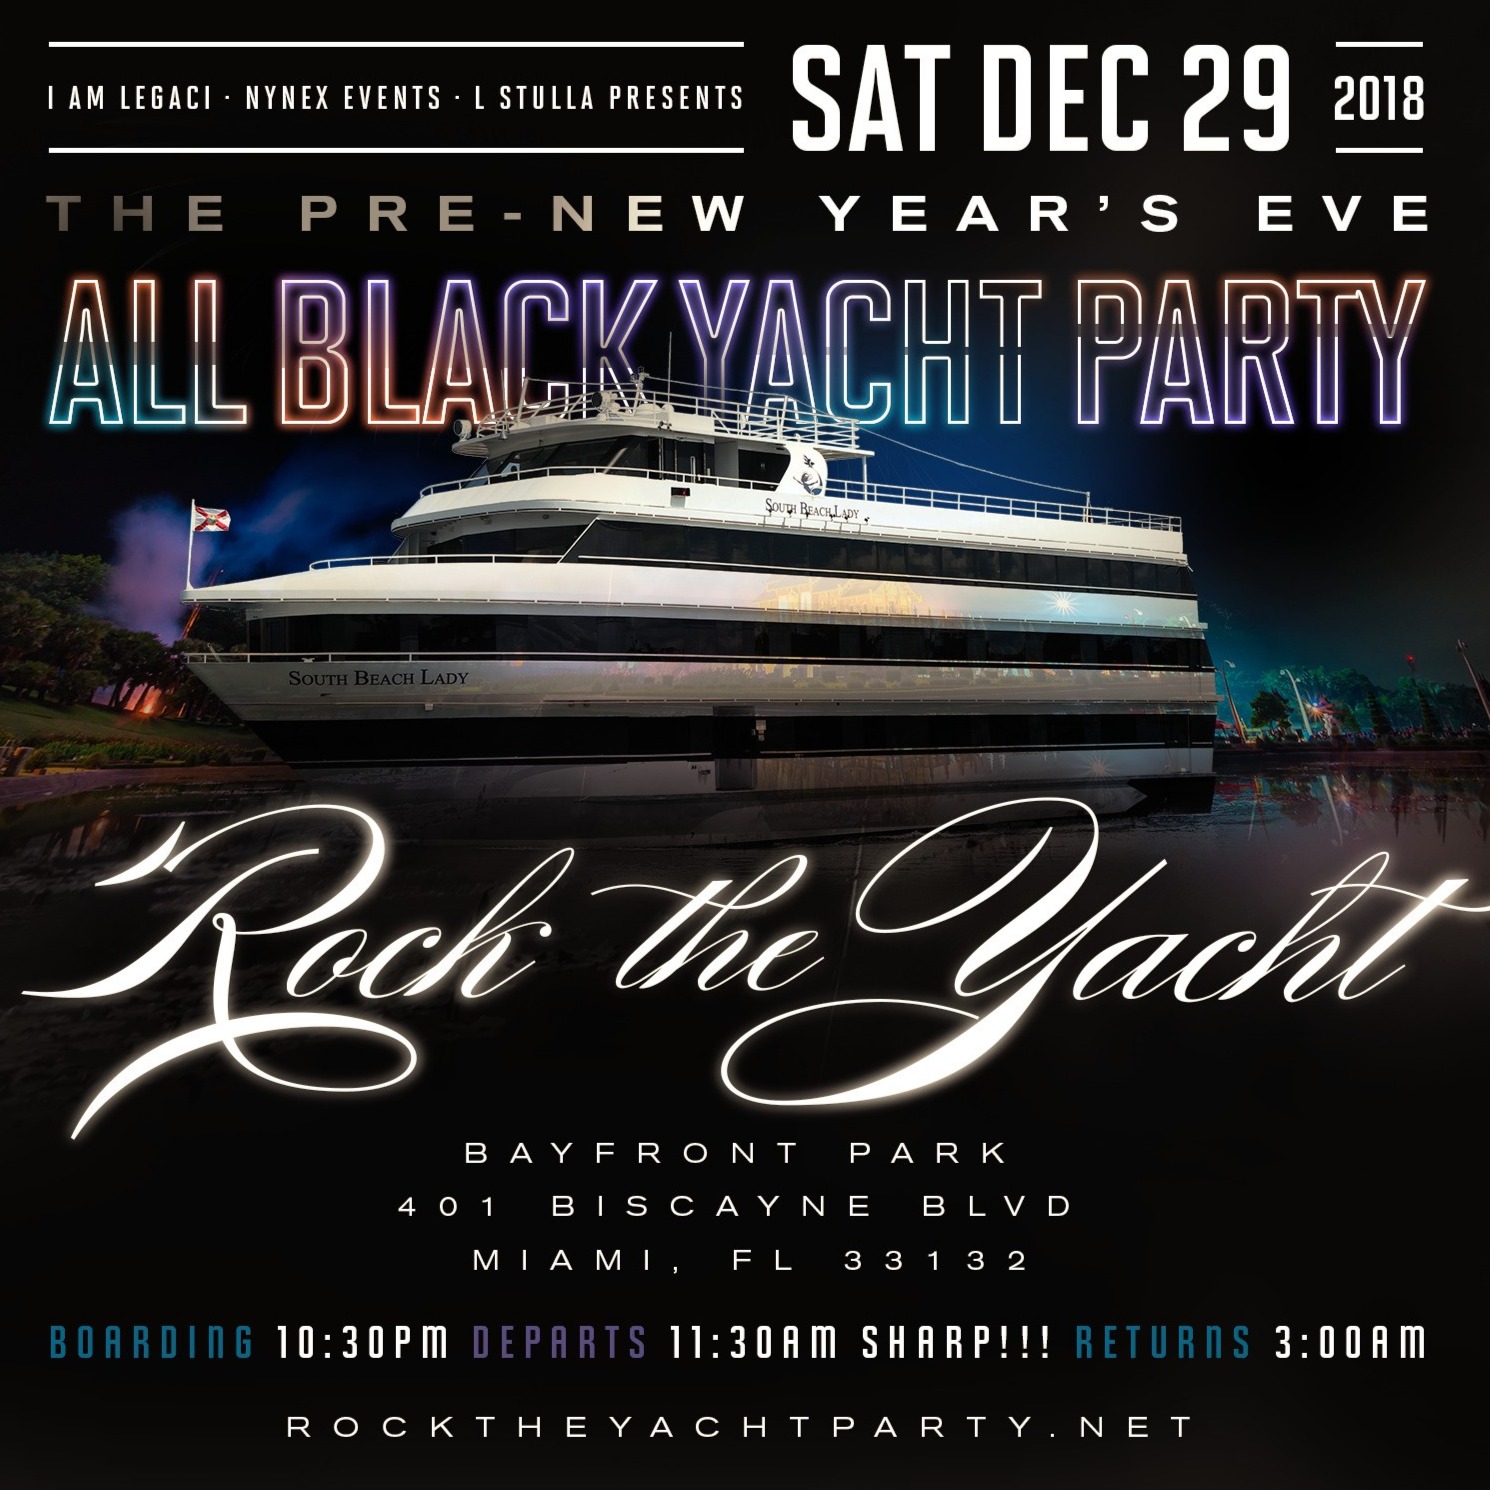 ROCK THE YACHT 2018 THE PRE-NEW YEAR'S EVE MIAMI ALL BLACK YACHT PARTY